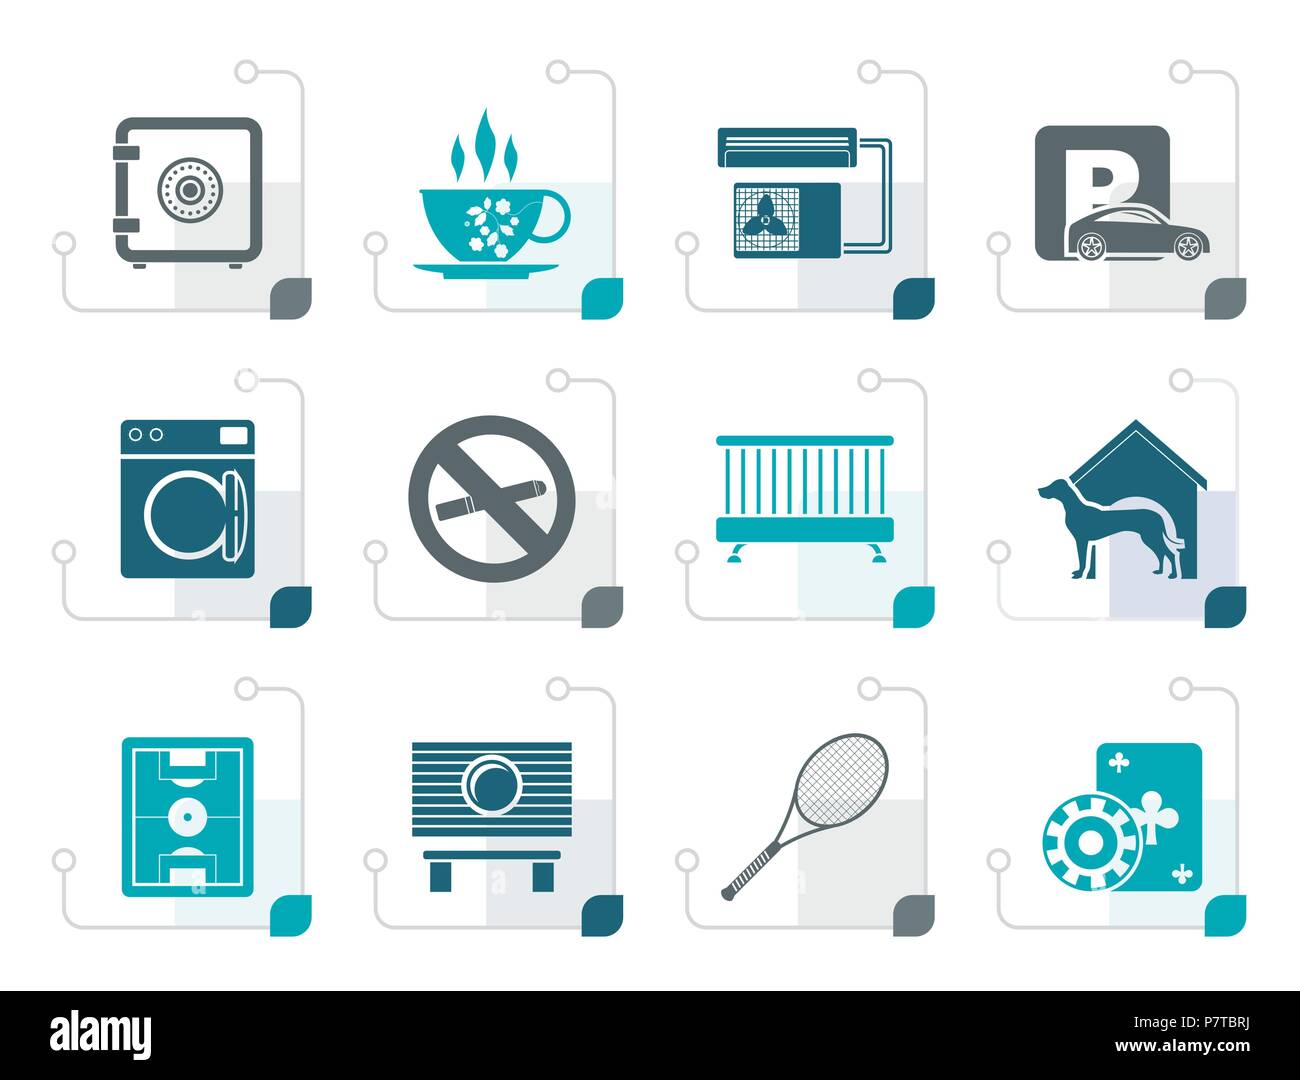 Stylized hotel and motel amenity icons - vector icon set Stock Vector